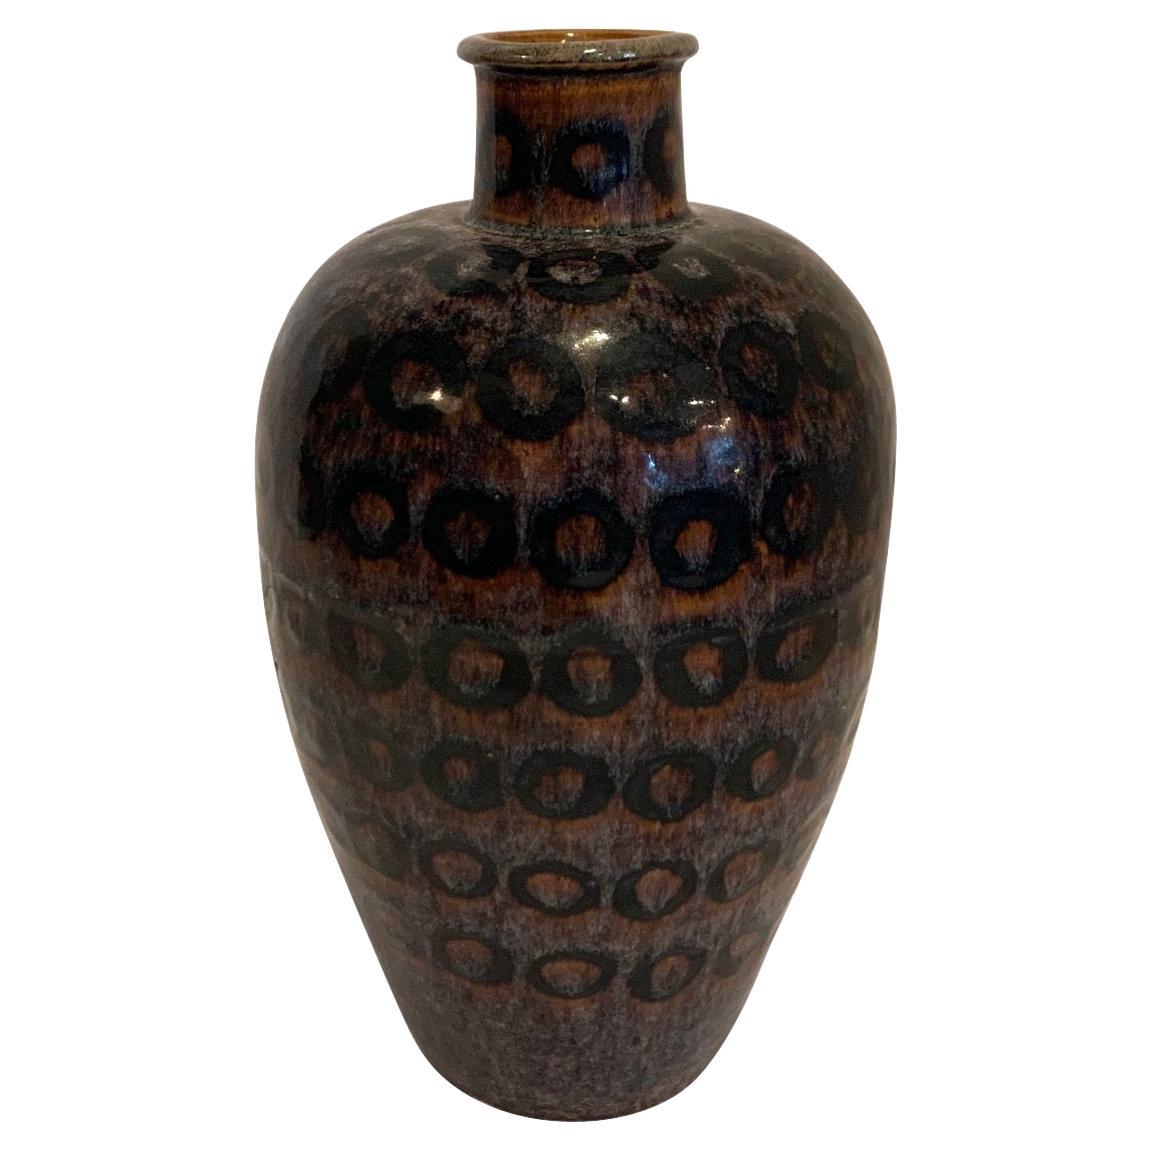 Chinese tall with thin spout ceramic vase.
Decorative black circles.
Sits nicely with taller S5504.

